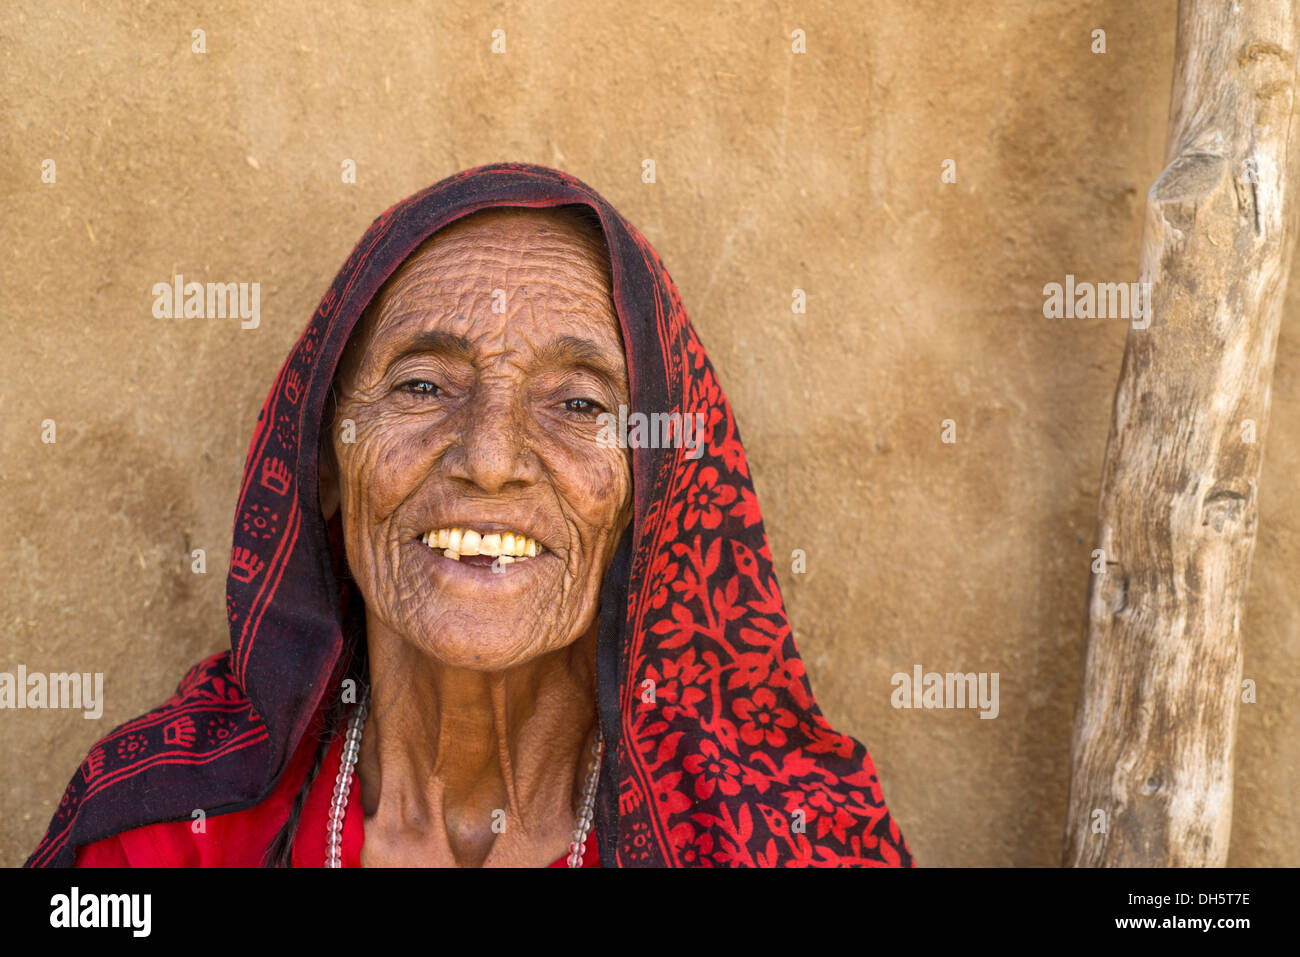 Old Indian woman with headscarf, portrait, Wüste Thar, Rajasthan, India Stock Photo